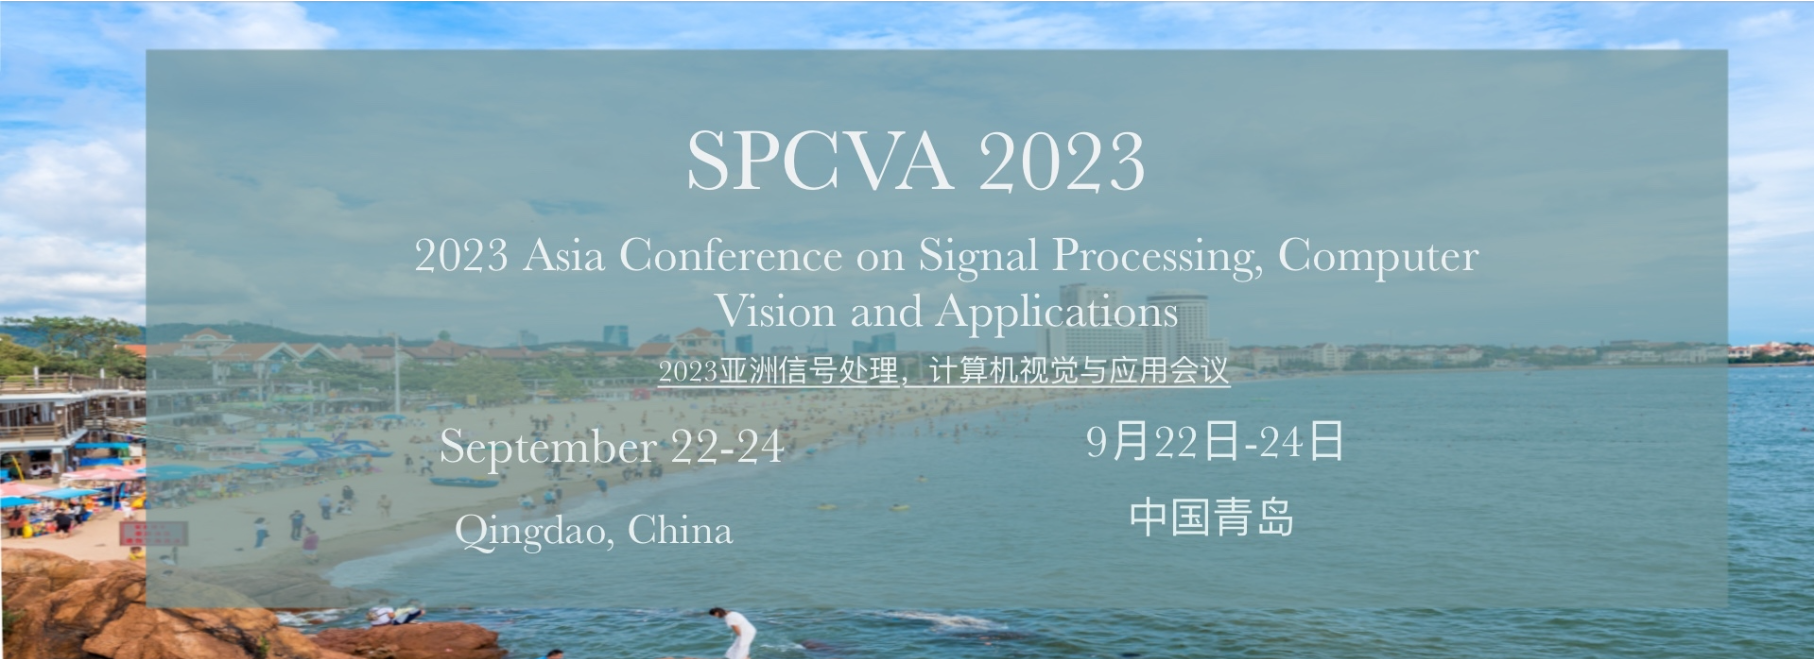 2023 Asia Conference on Signal Processing, Computer Vision and Applications (SPCVA 2023)  -EI Compendex, Qingdao, Shandong, China